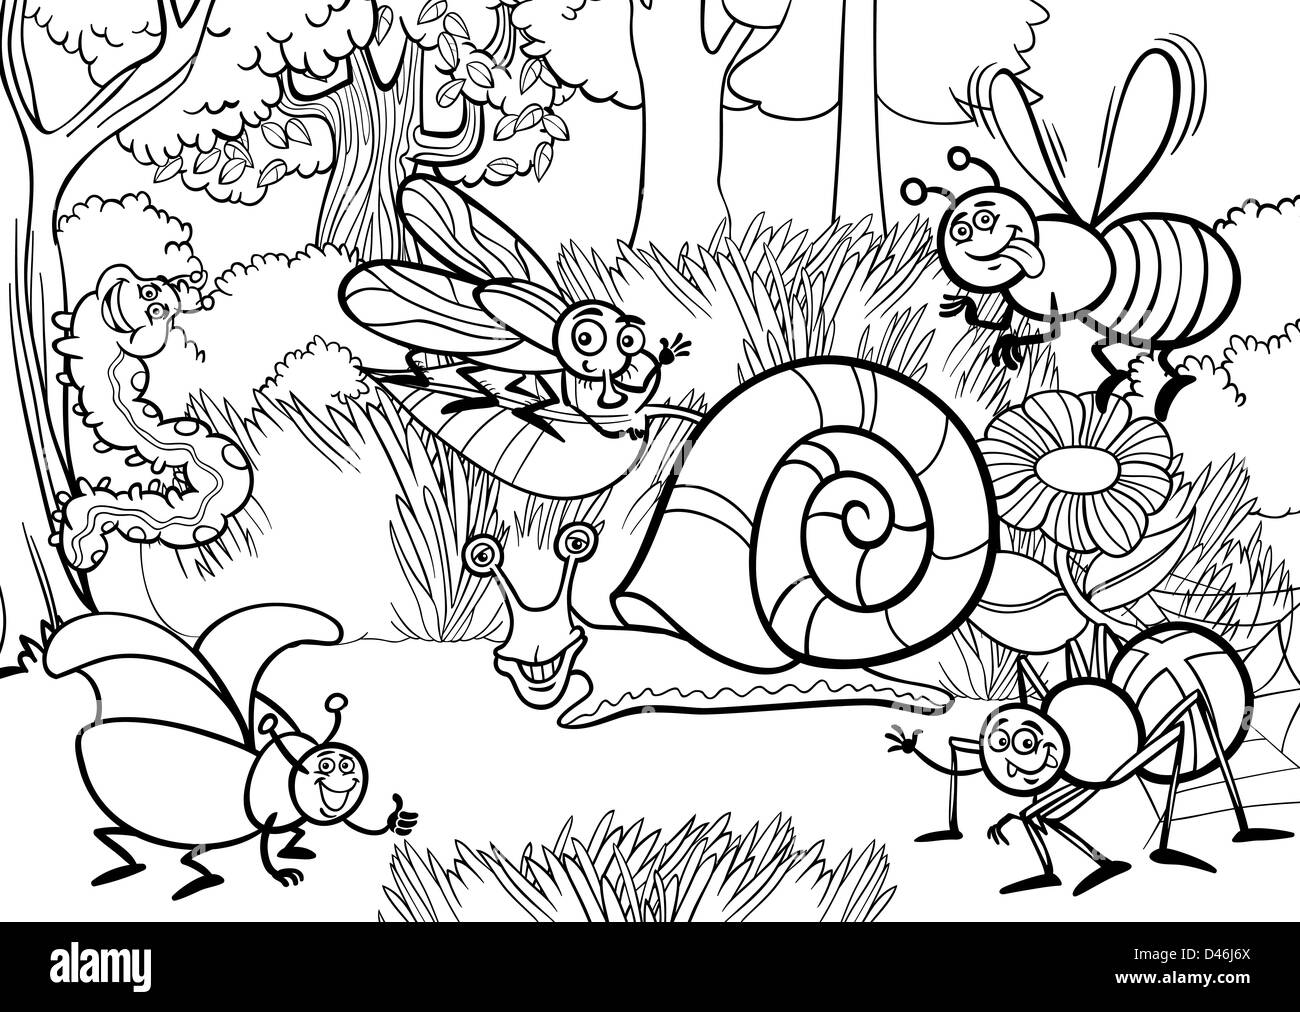 Black and White Cartoon Illustration of Funny Insects or Bugs on the Meadow Natural Rural Background Scene for Coloring Book Stock Photo